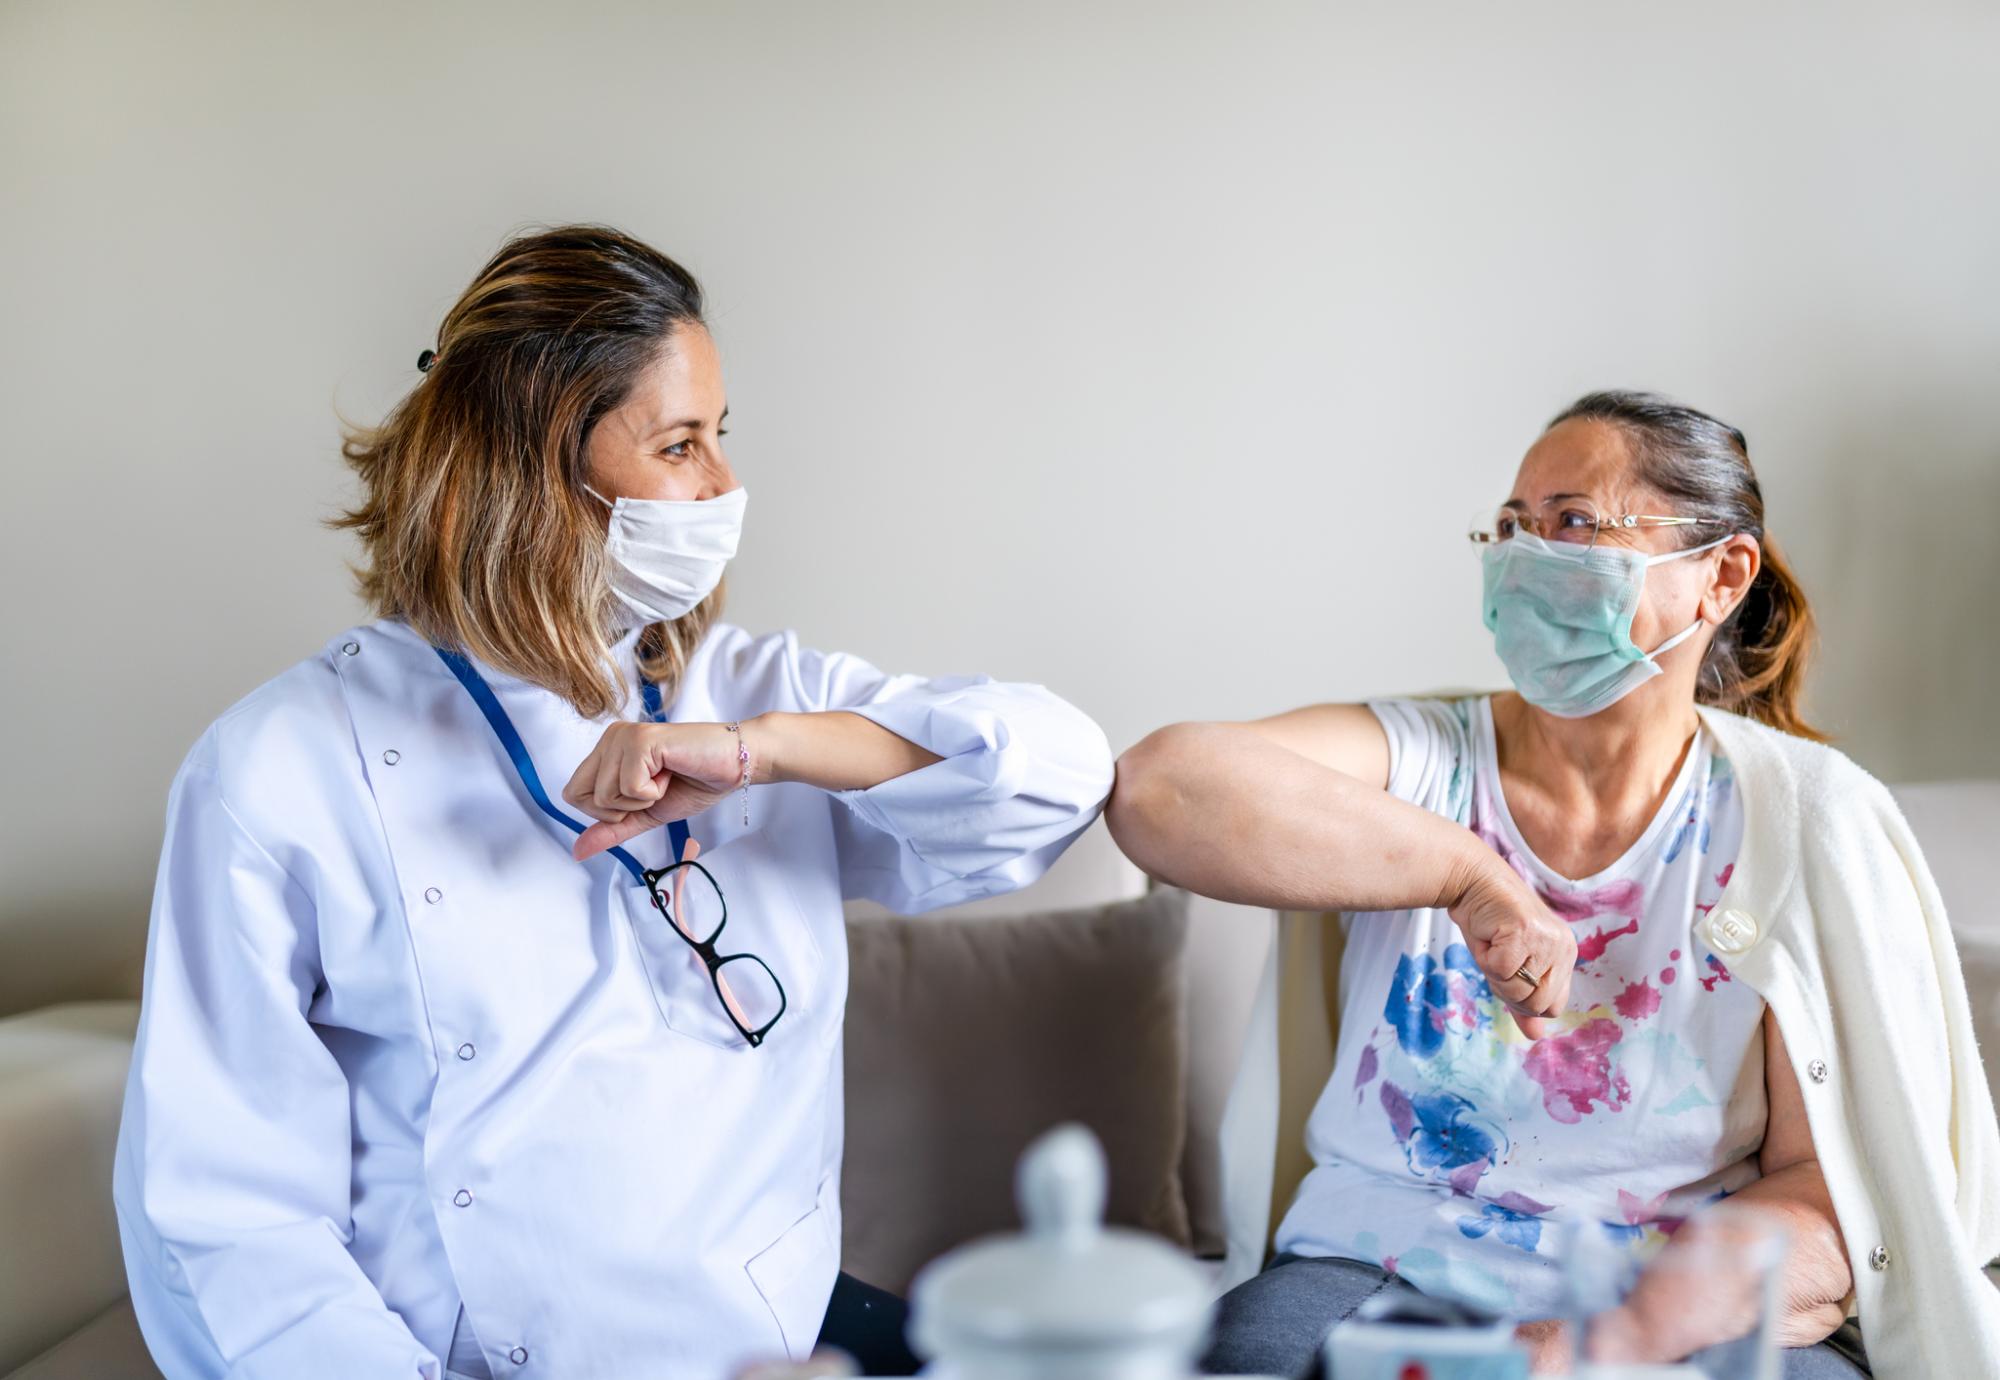 Nurse and patient bumping elbows in a care home, with face coverings on.